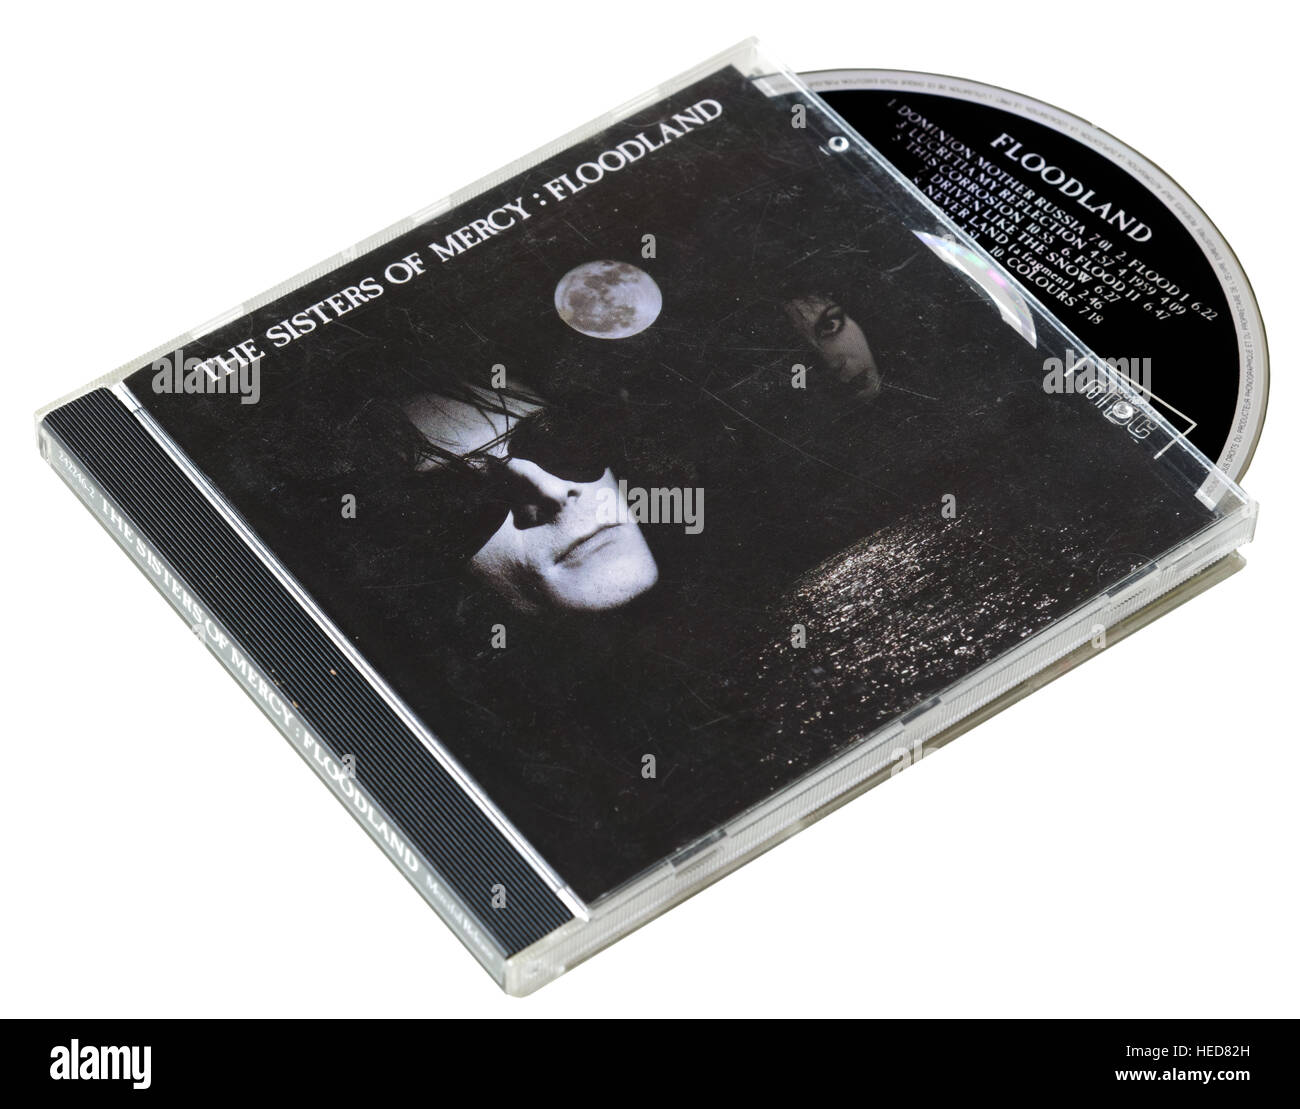 The Sisters of Mercy Floodland CD Stock Photo